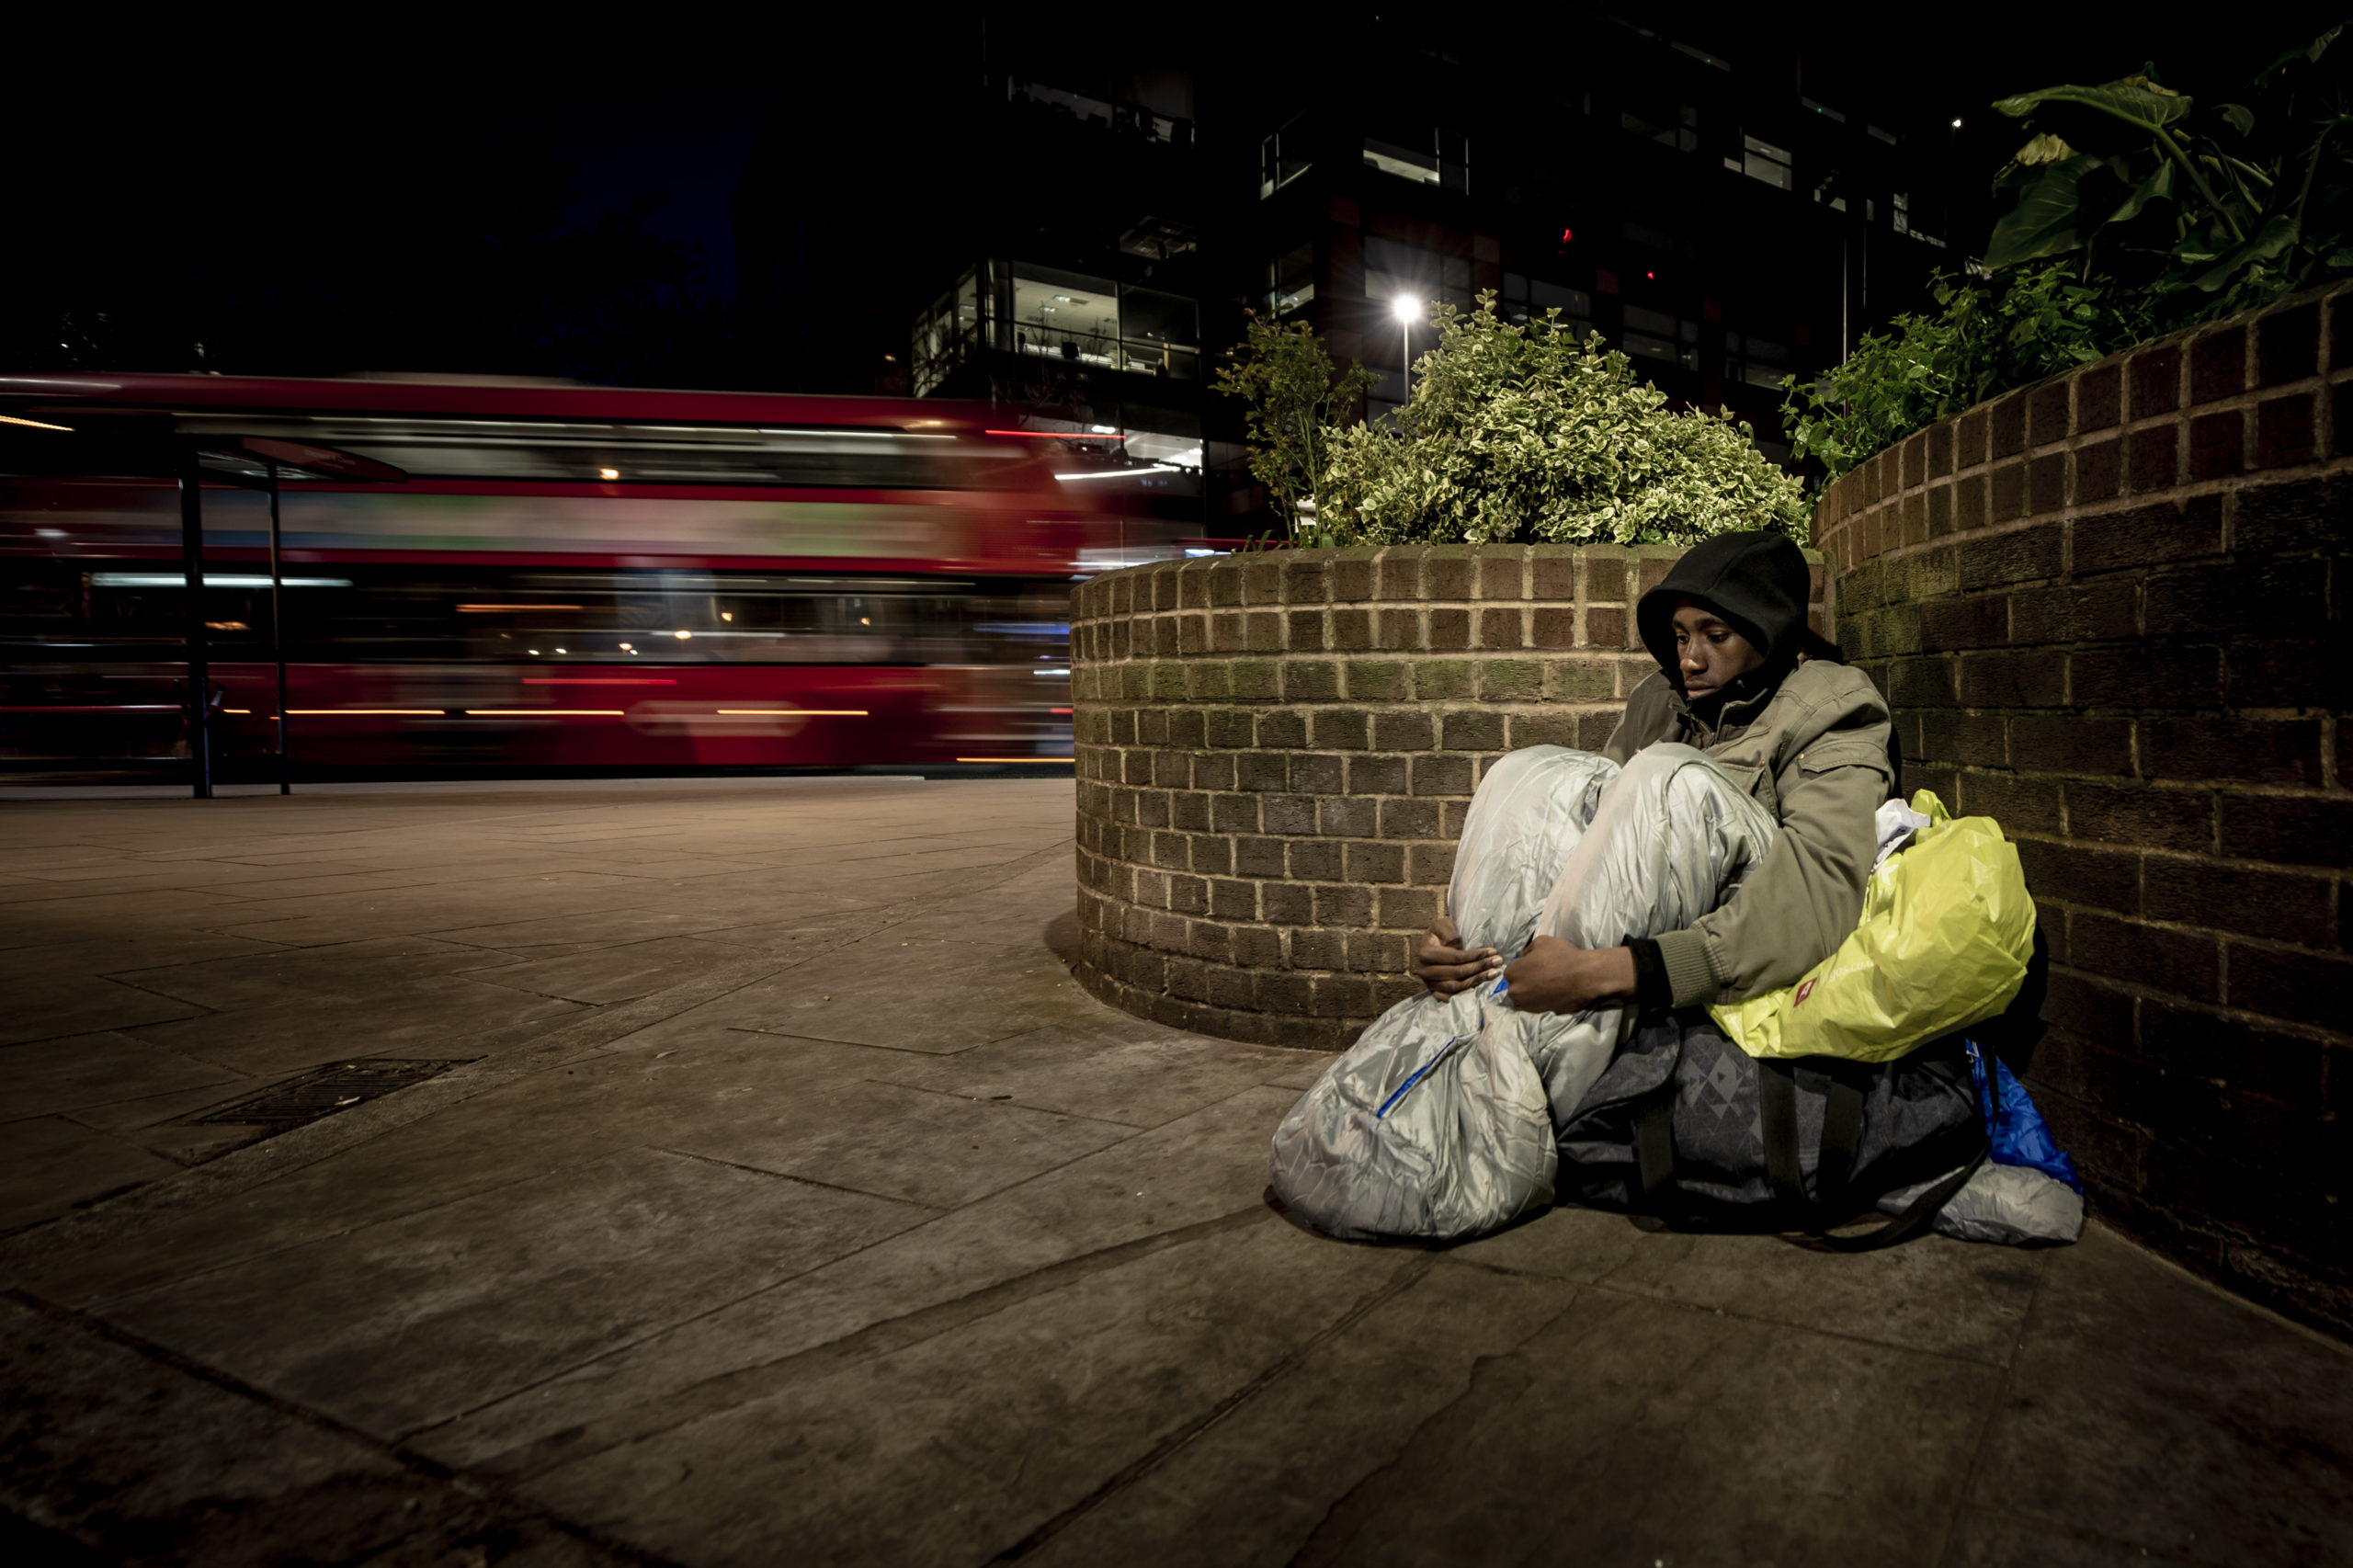 Homeless man sitting on the ground, resting against a brick fence. He has a few belongings next to him. Night time, outdoors and a bus driving in the background.